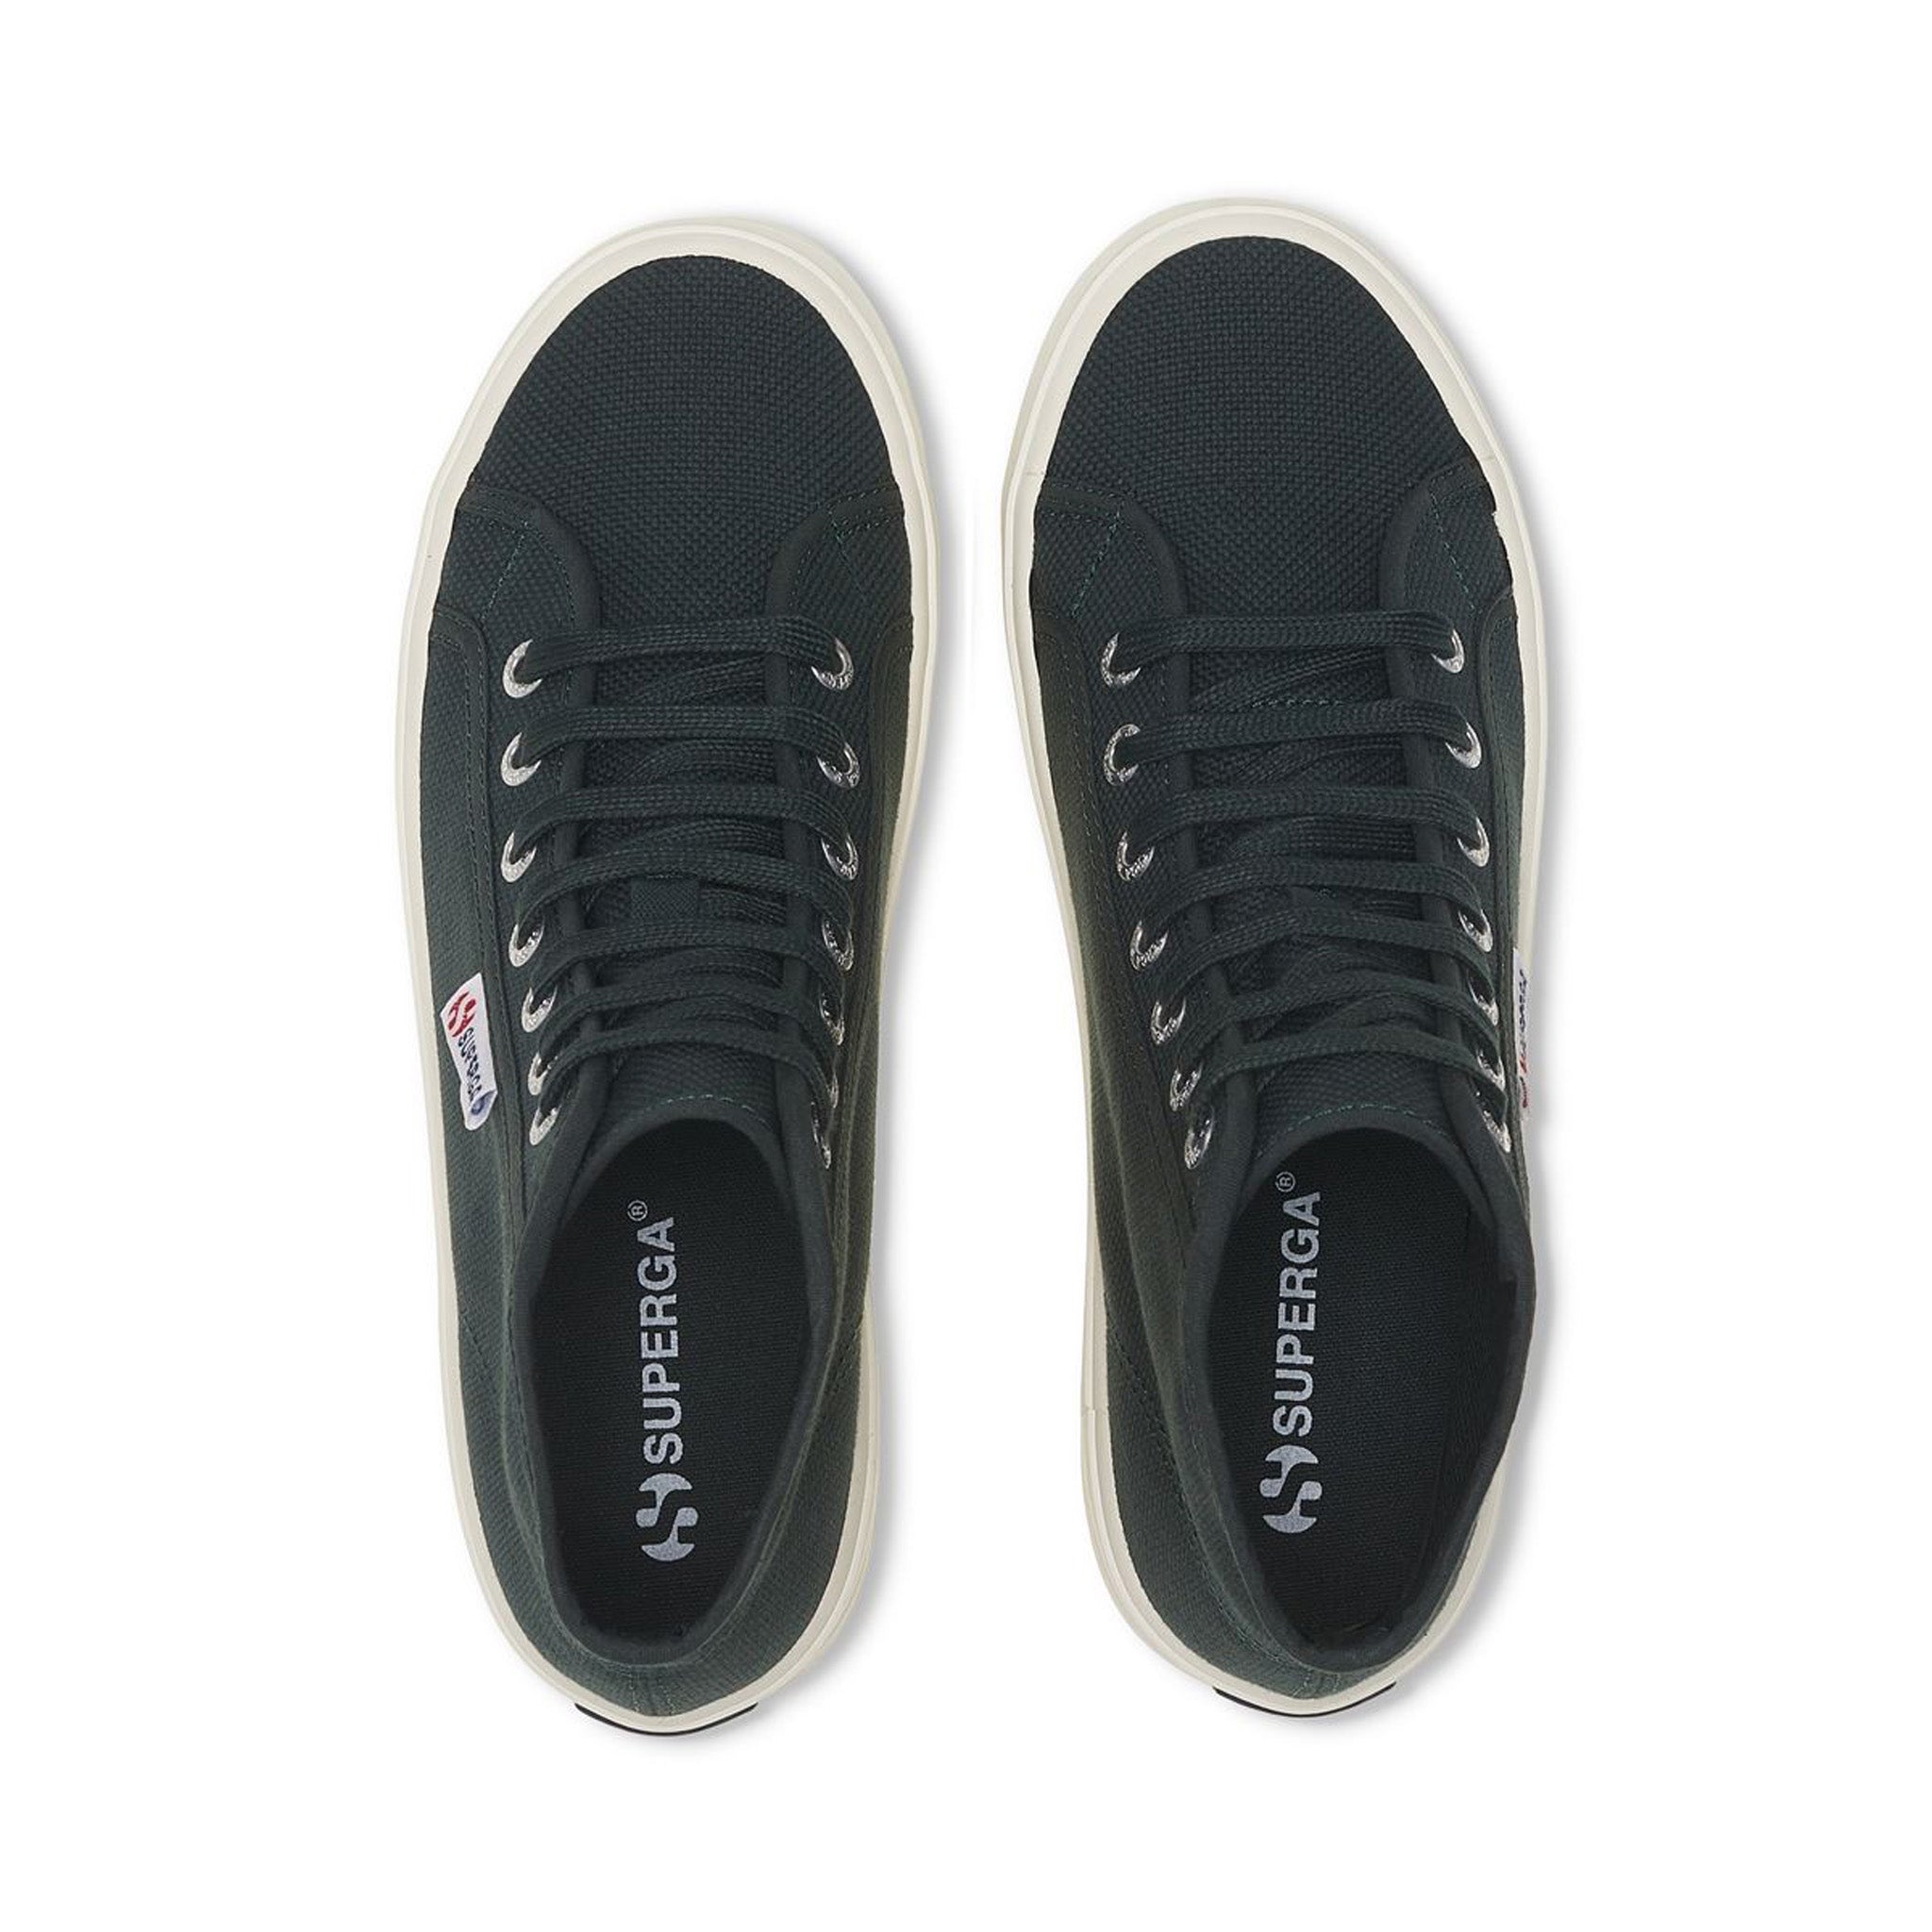 Superga 2341 Alpina Sneakers - Green Dk Forest Avorio. Top view.